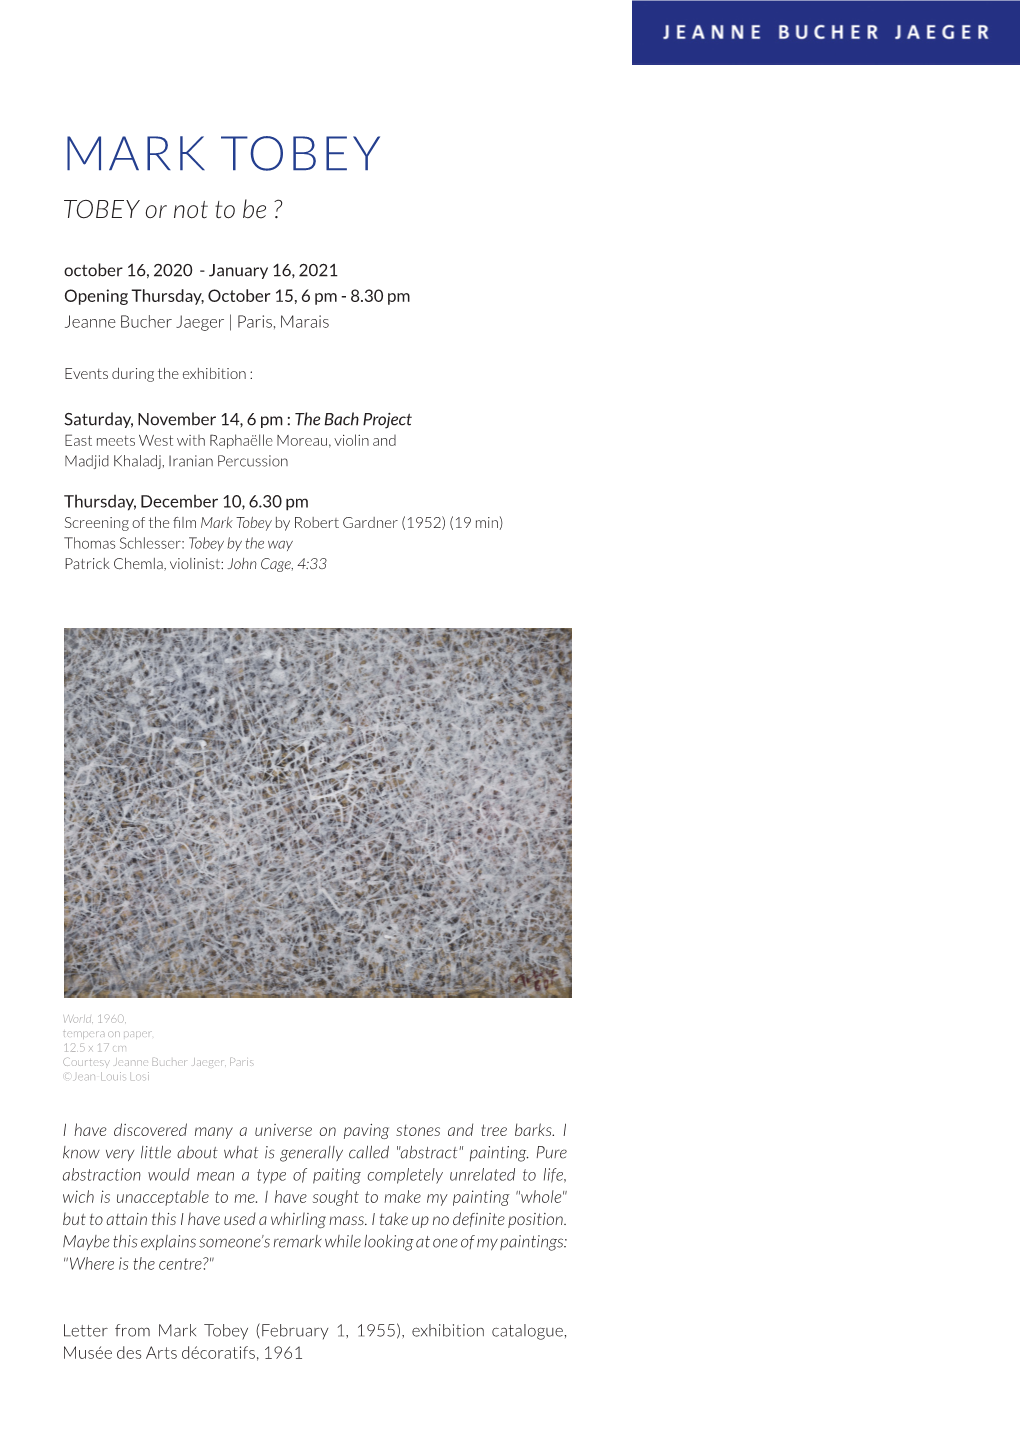 MARK TOBEY TOBEY Or Not to Be ? October 16, 2020 - January 16, 2021 Opening Thursday, October 15, 6 Pm - 8.30 Pm Jeanne Bucher Jaeger | Paris, Marais